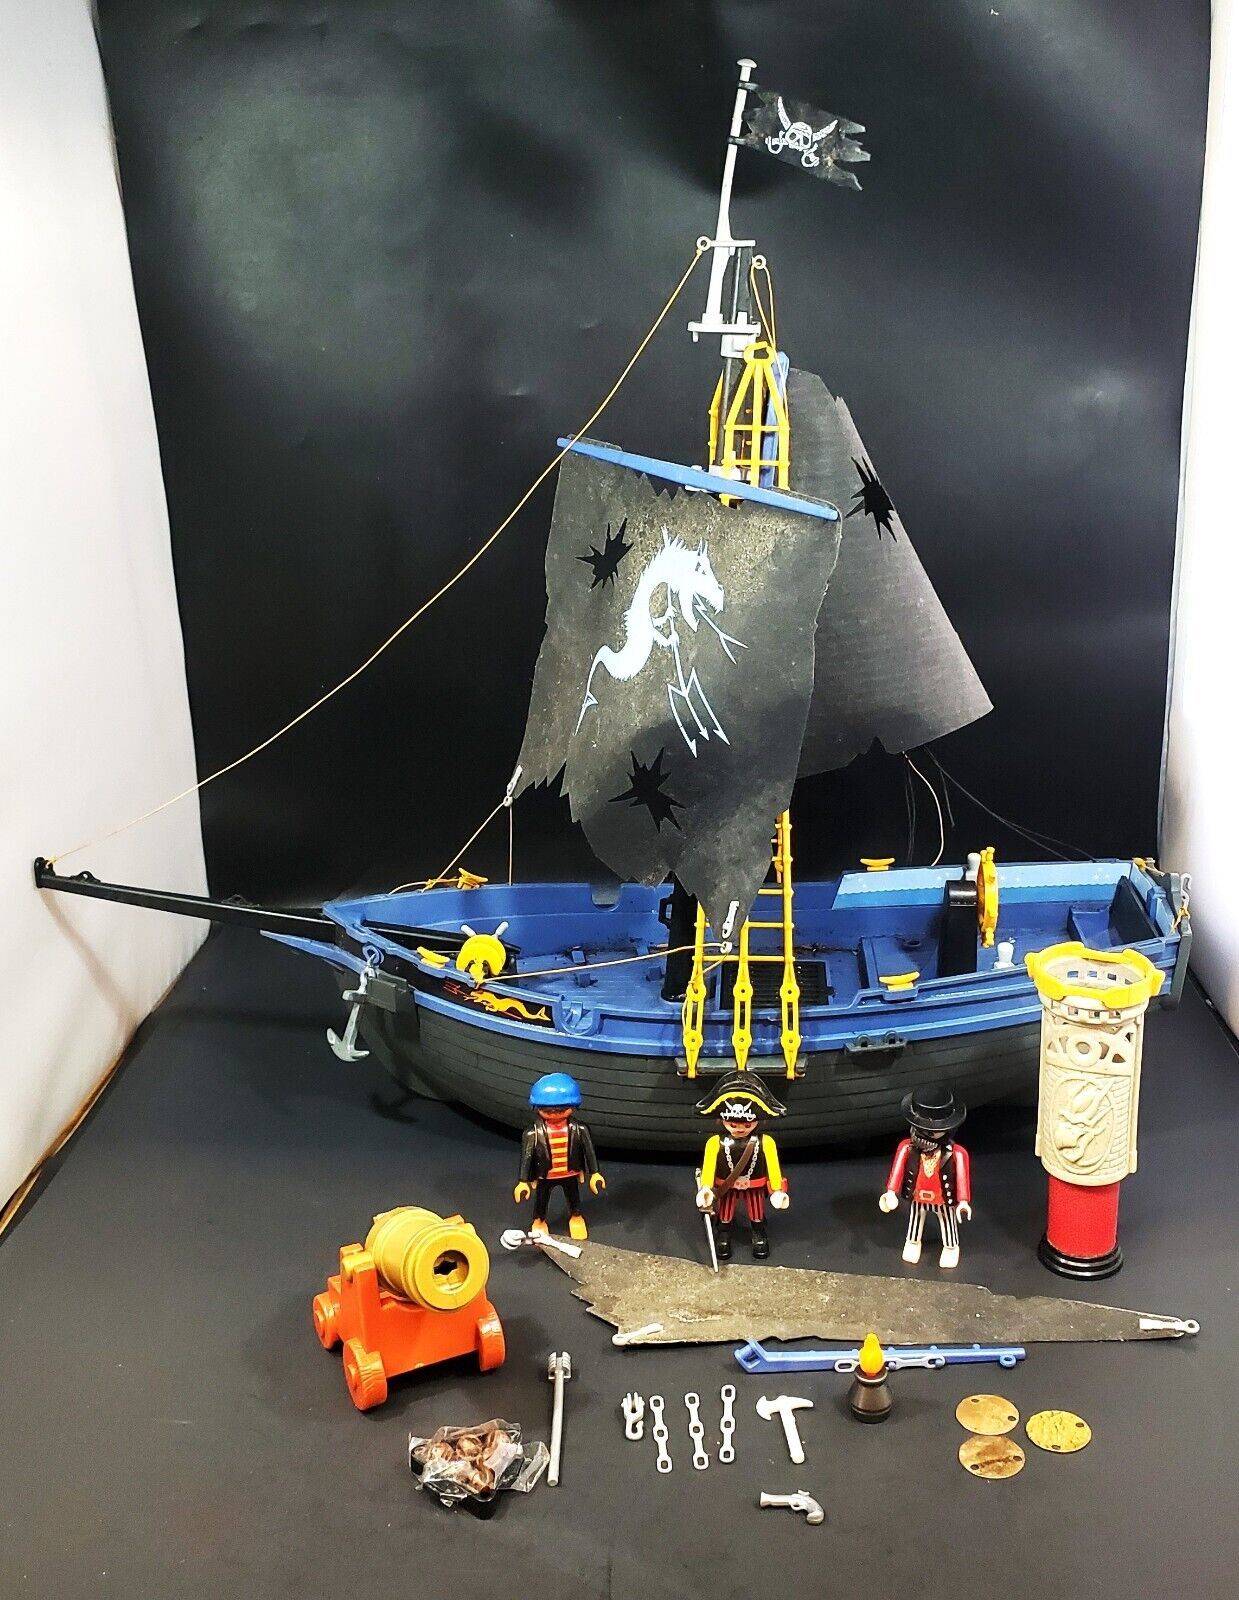 Playmobil Pirate Medieval Ship -Boat-Shells - Figurines and more "PARTS" - $79.19